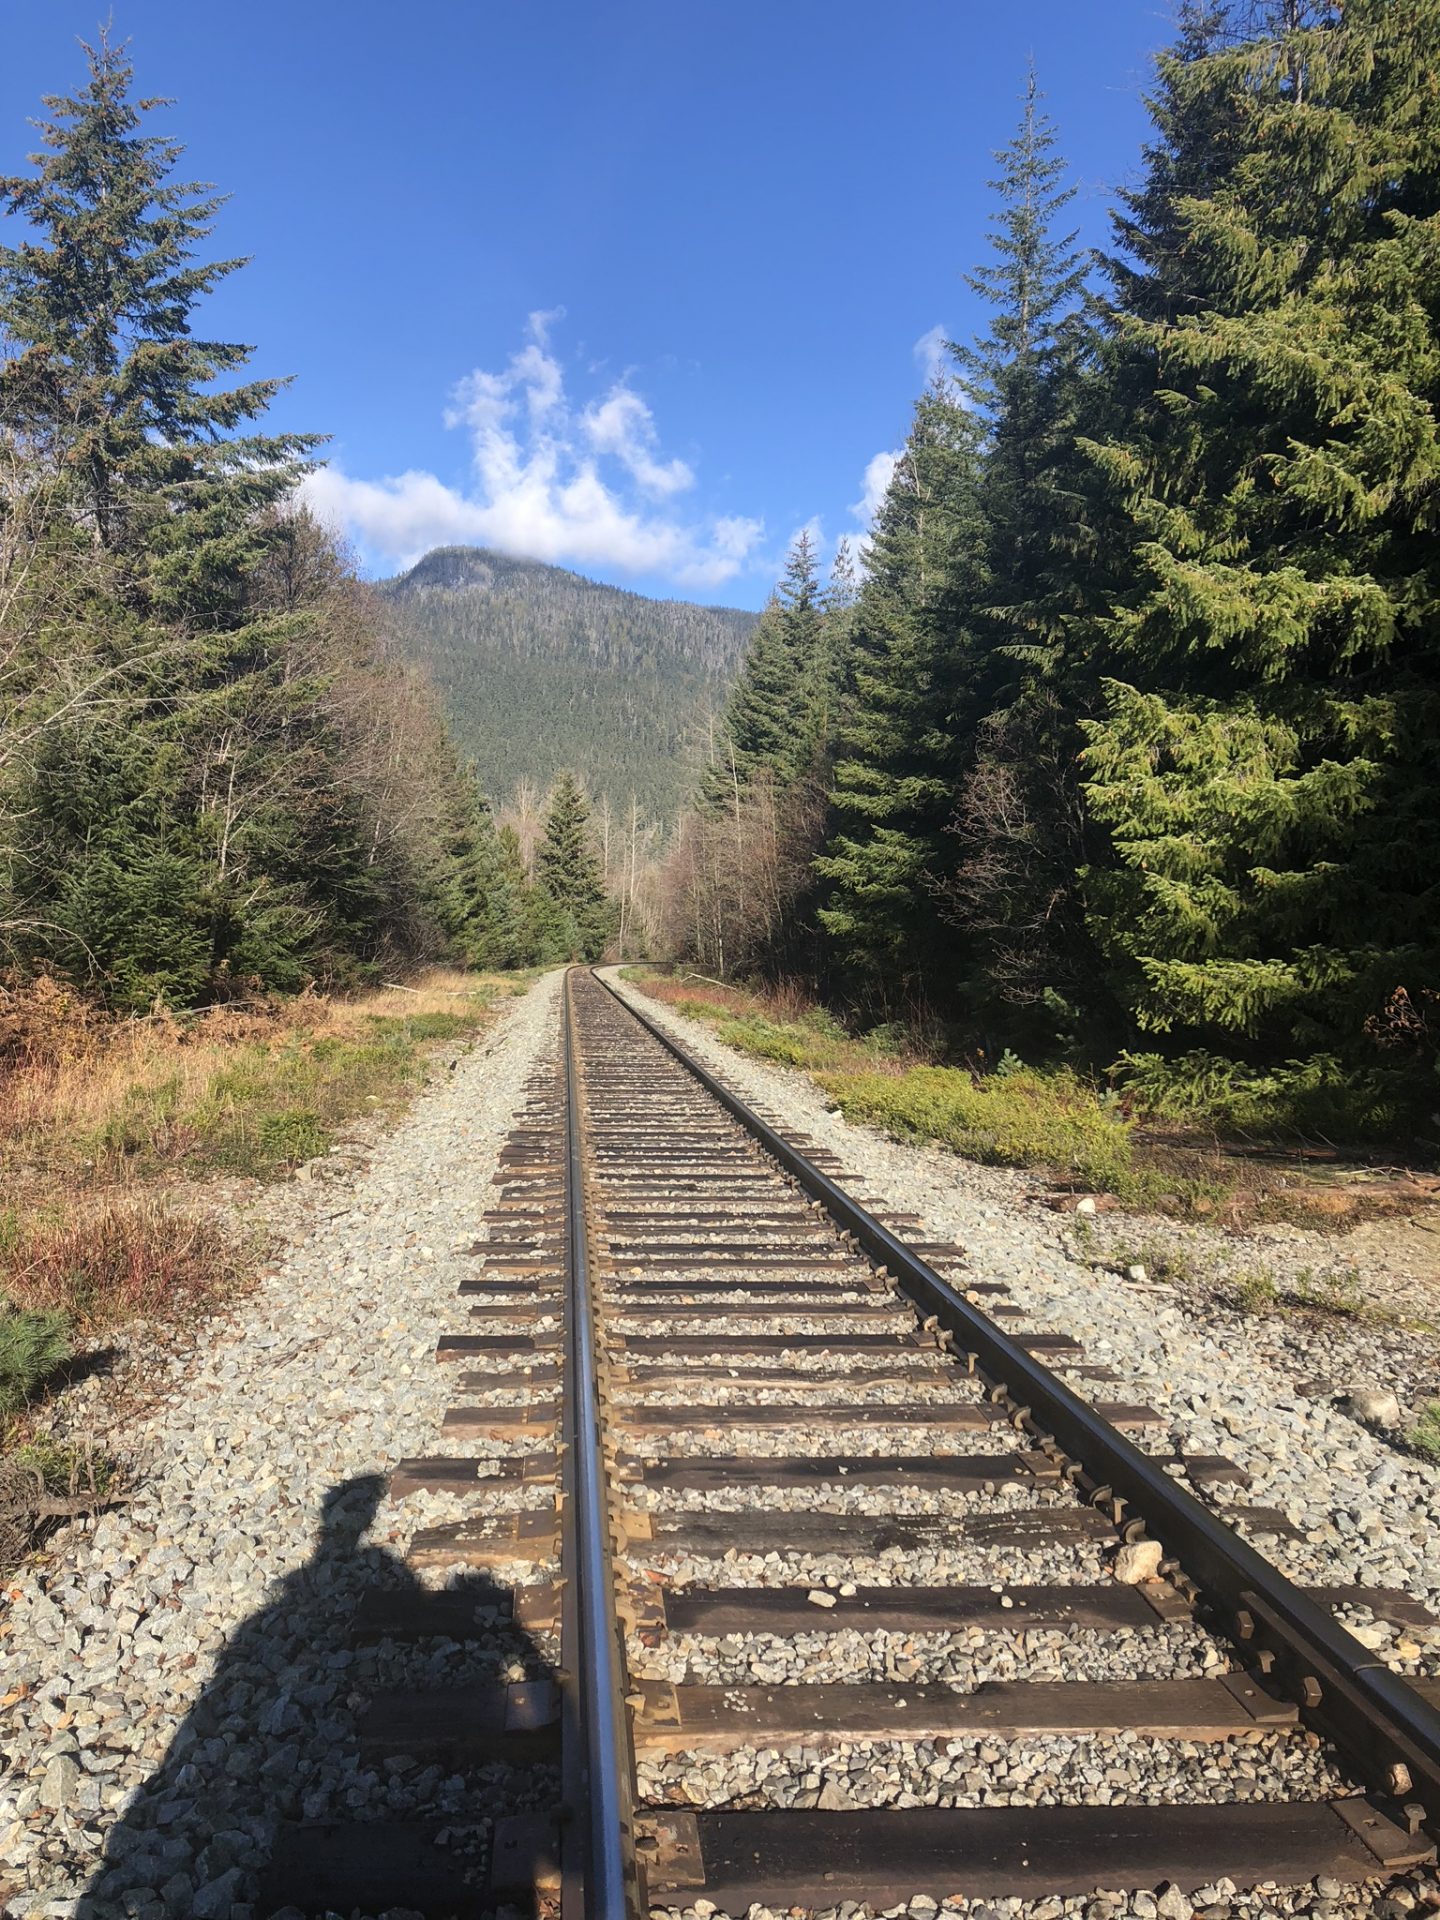 Train track near the mountains at Whistler, Canada